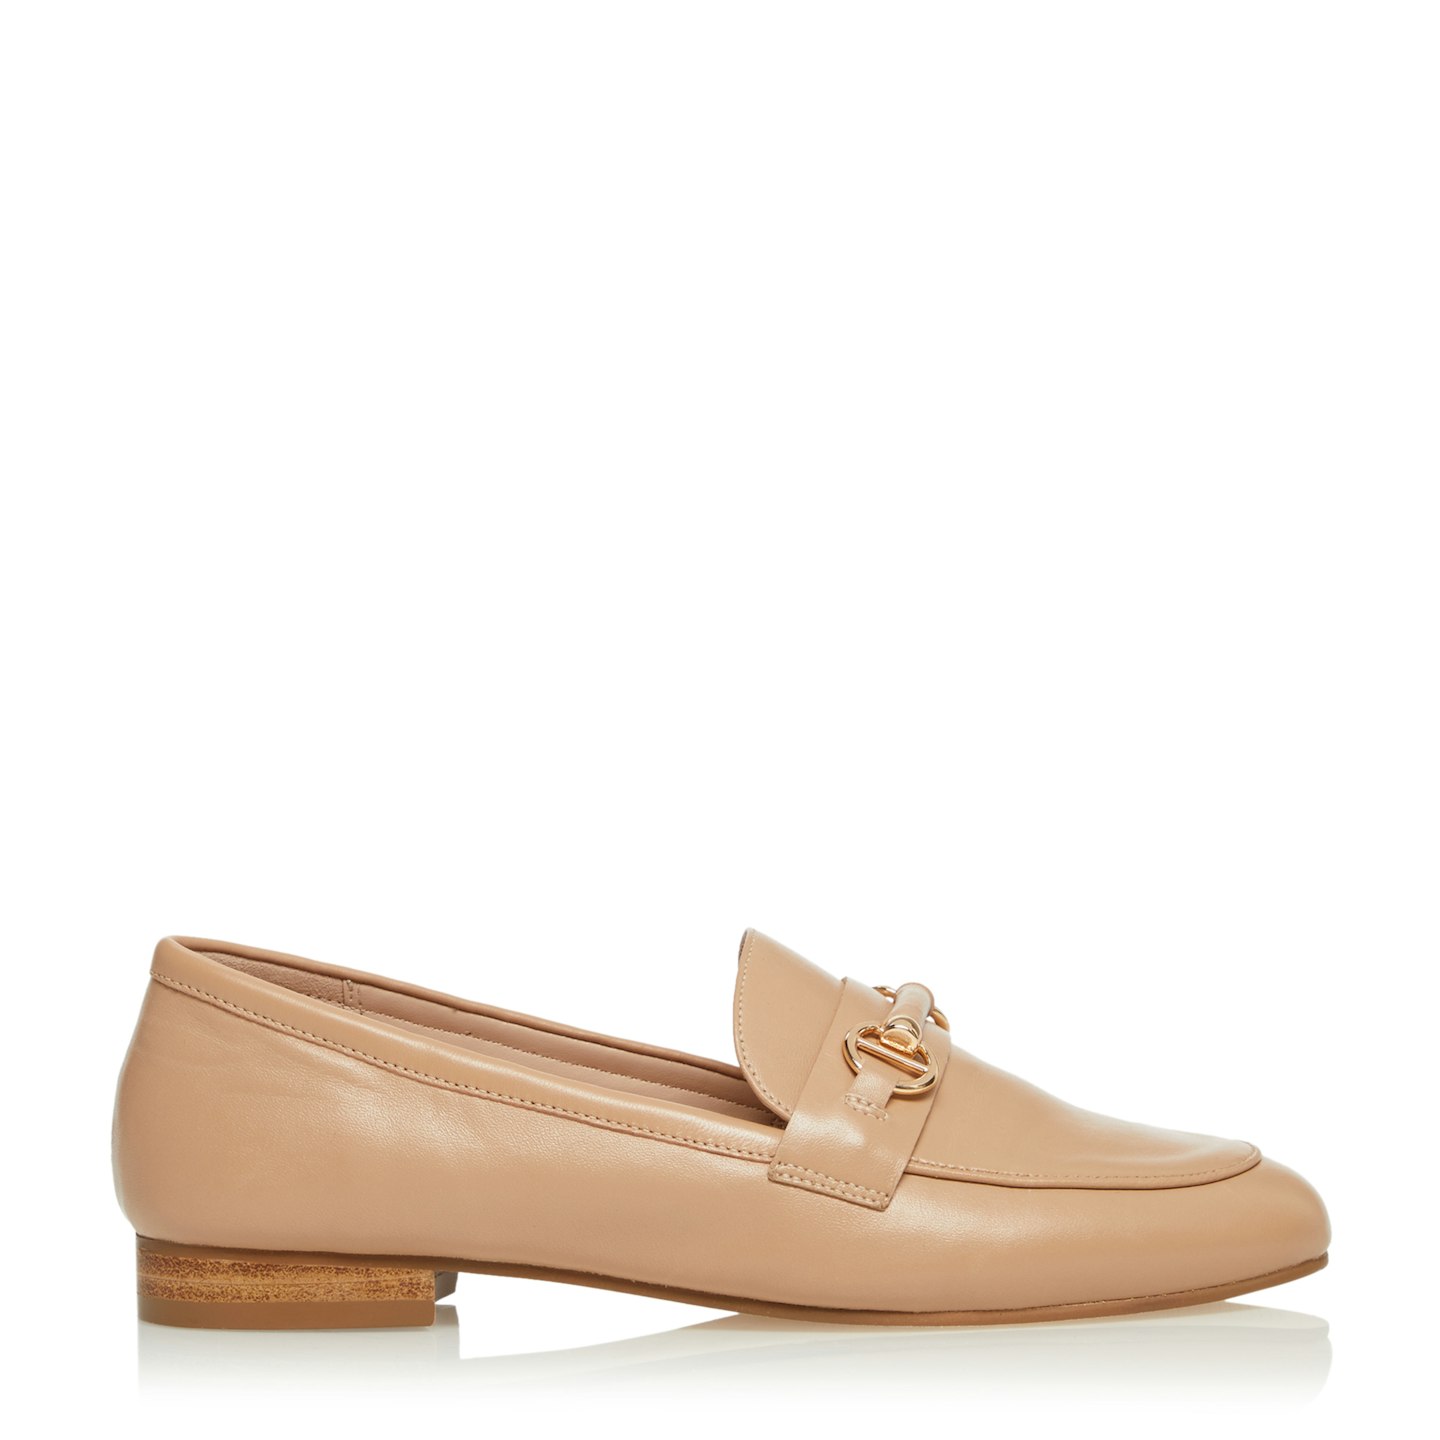 Dune London, Snaffle Trim Loafers, £75